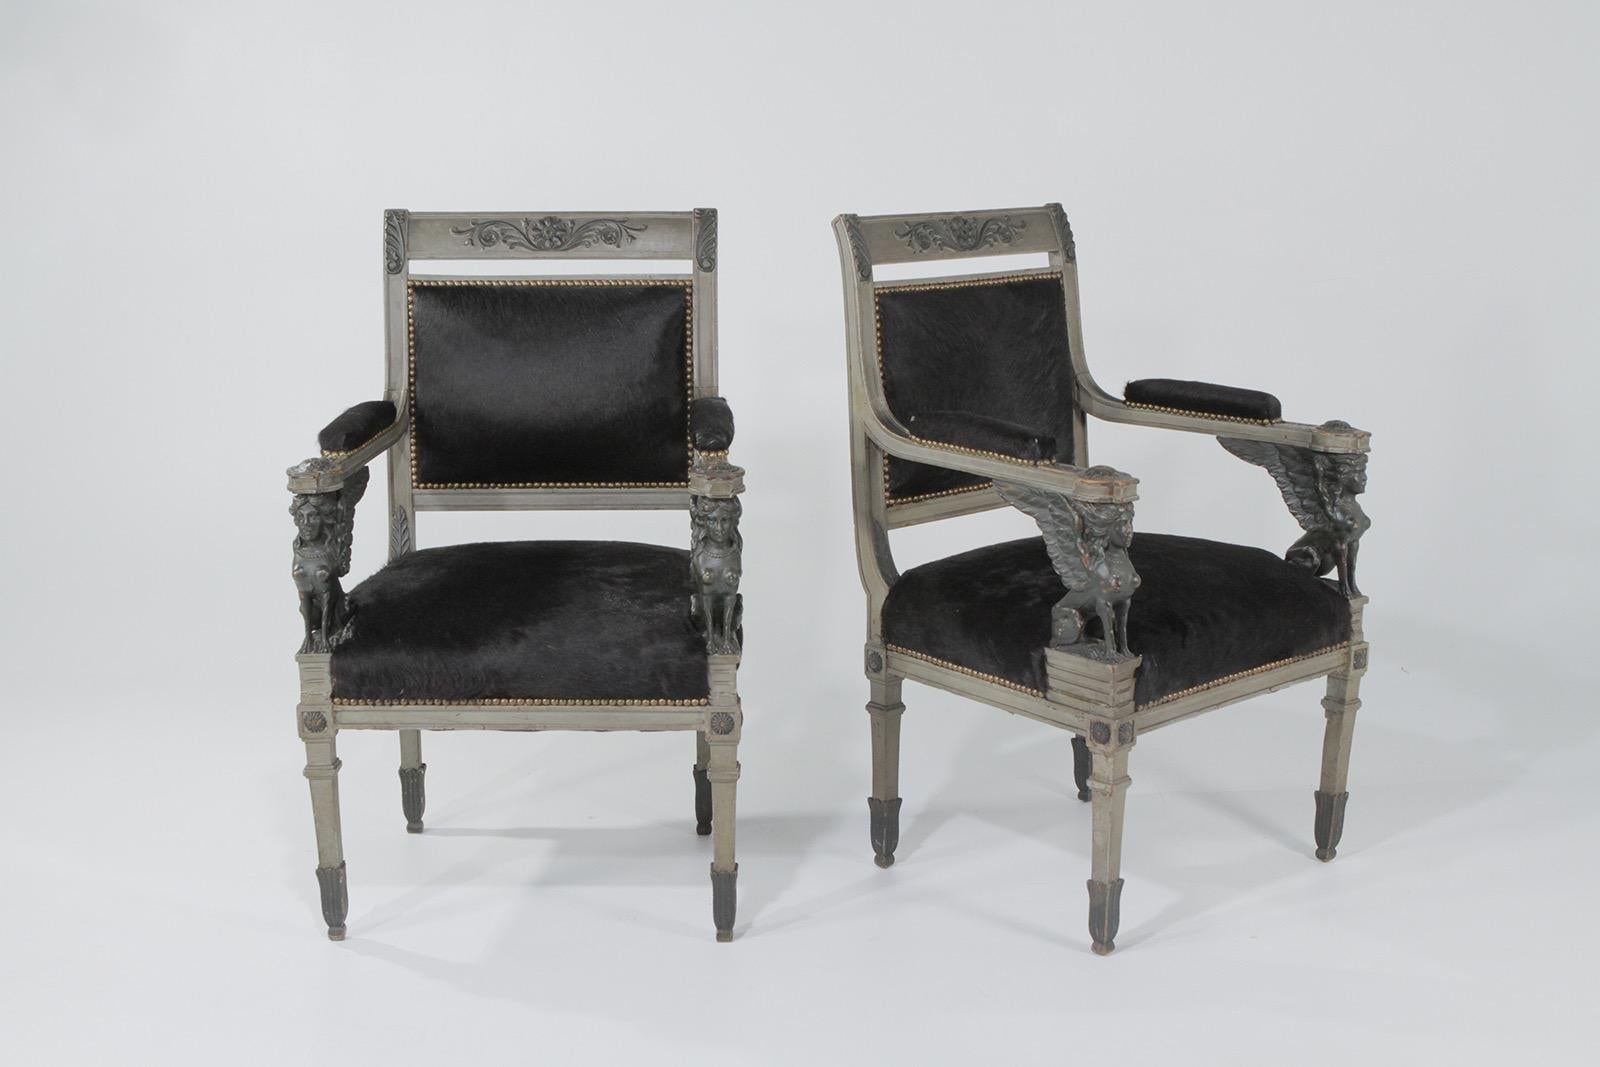 Superb Neoclassical Egyptian Revival Armchairs with Black Cowhide Upholstery 2